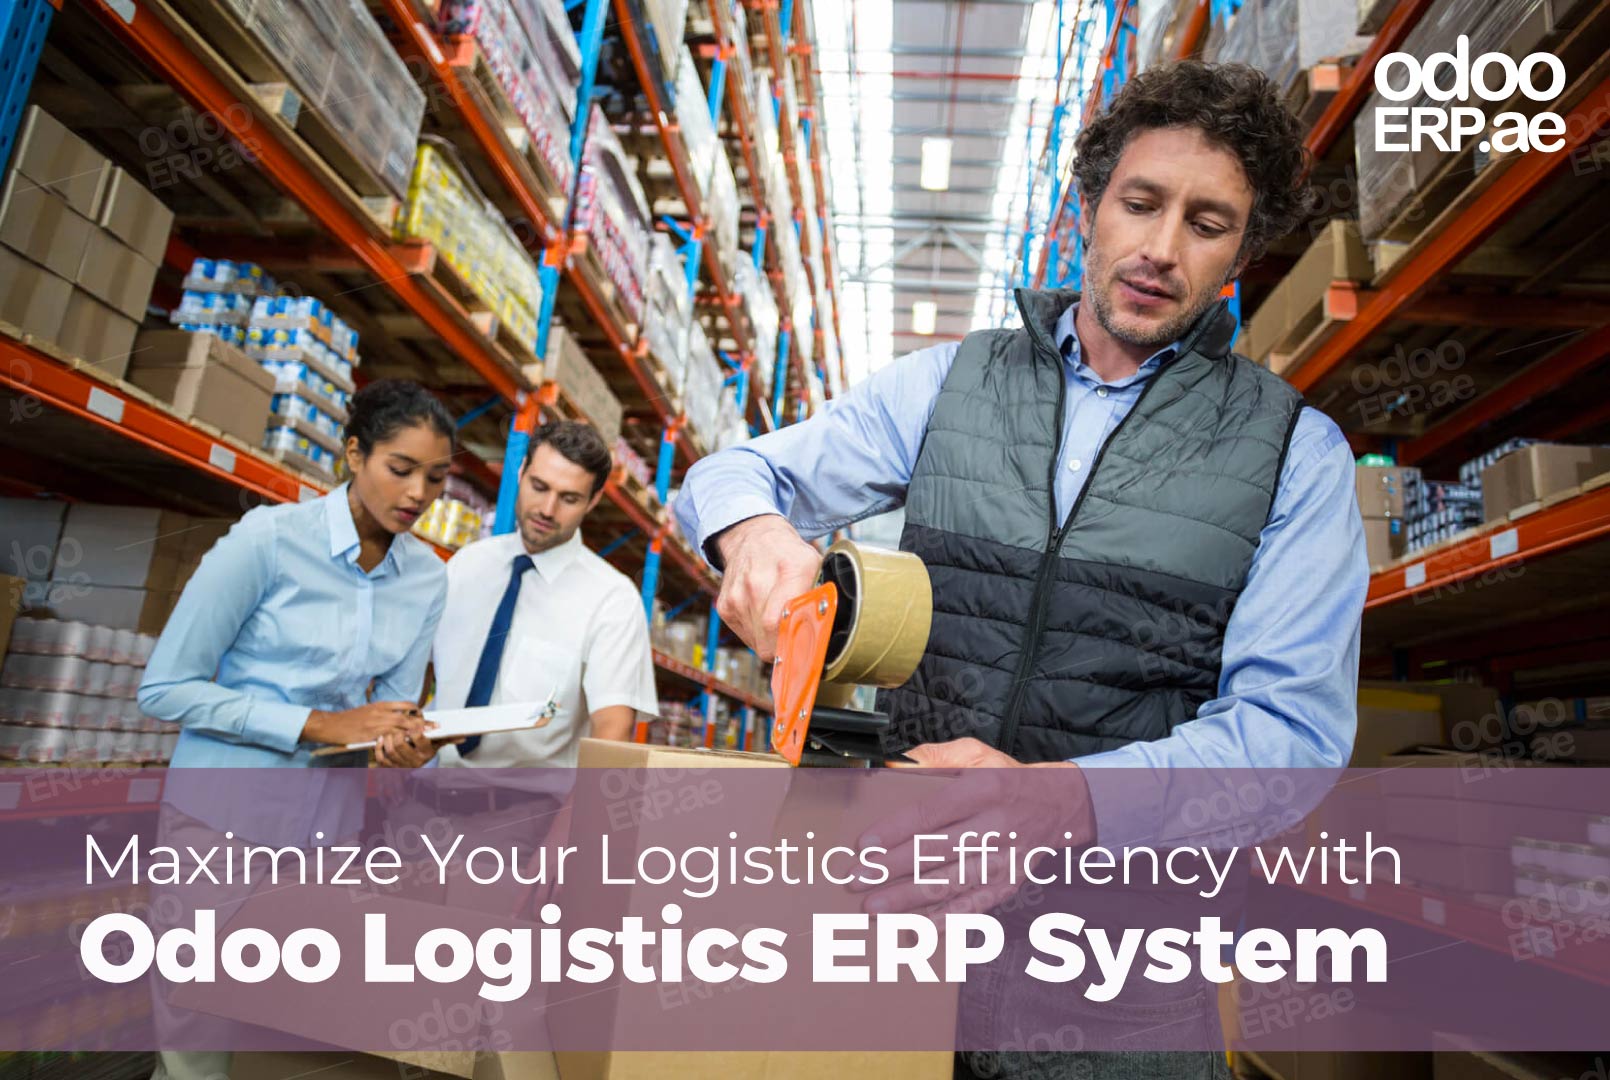 Maximize Your Logistics Efficiency with Odoo Logistics ERP System